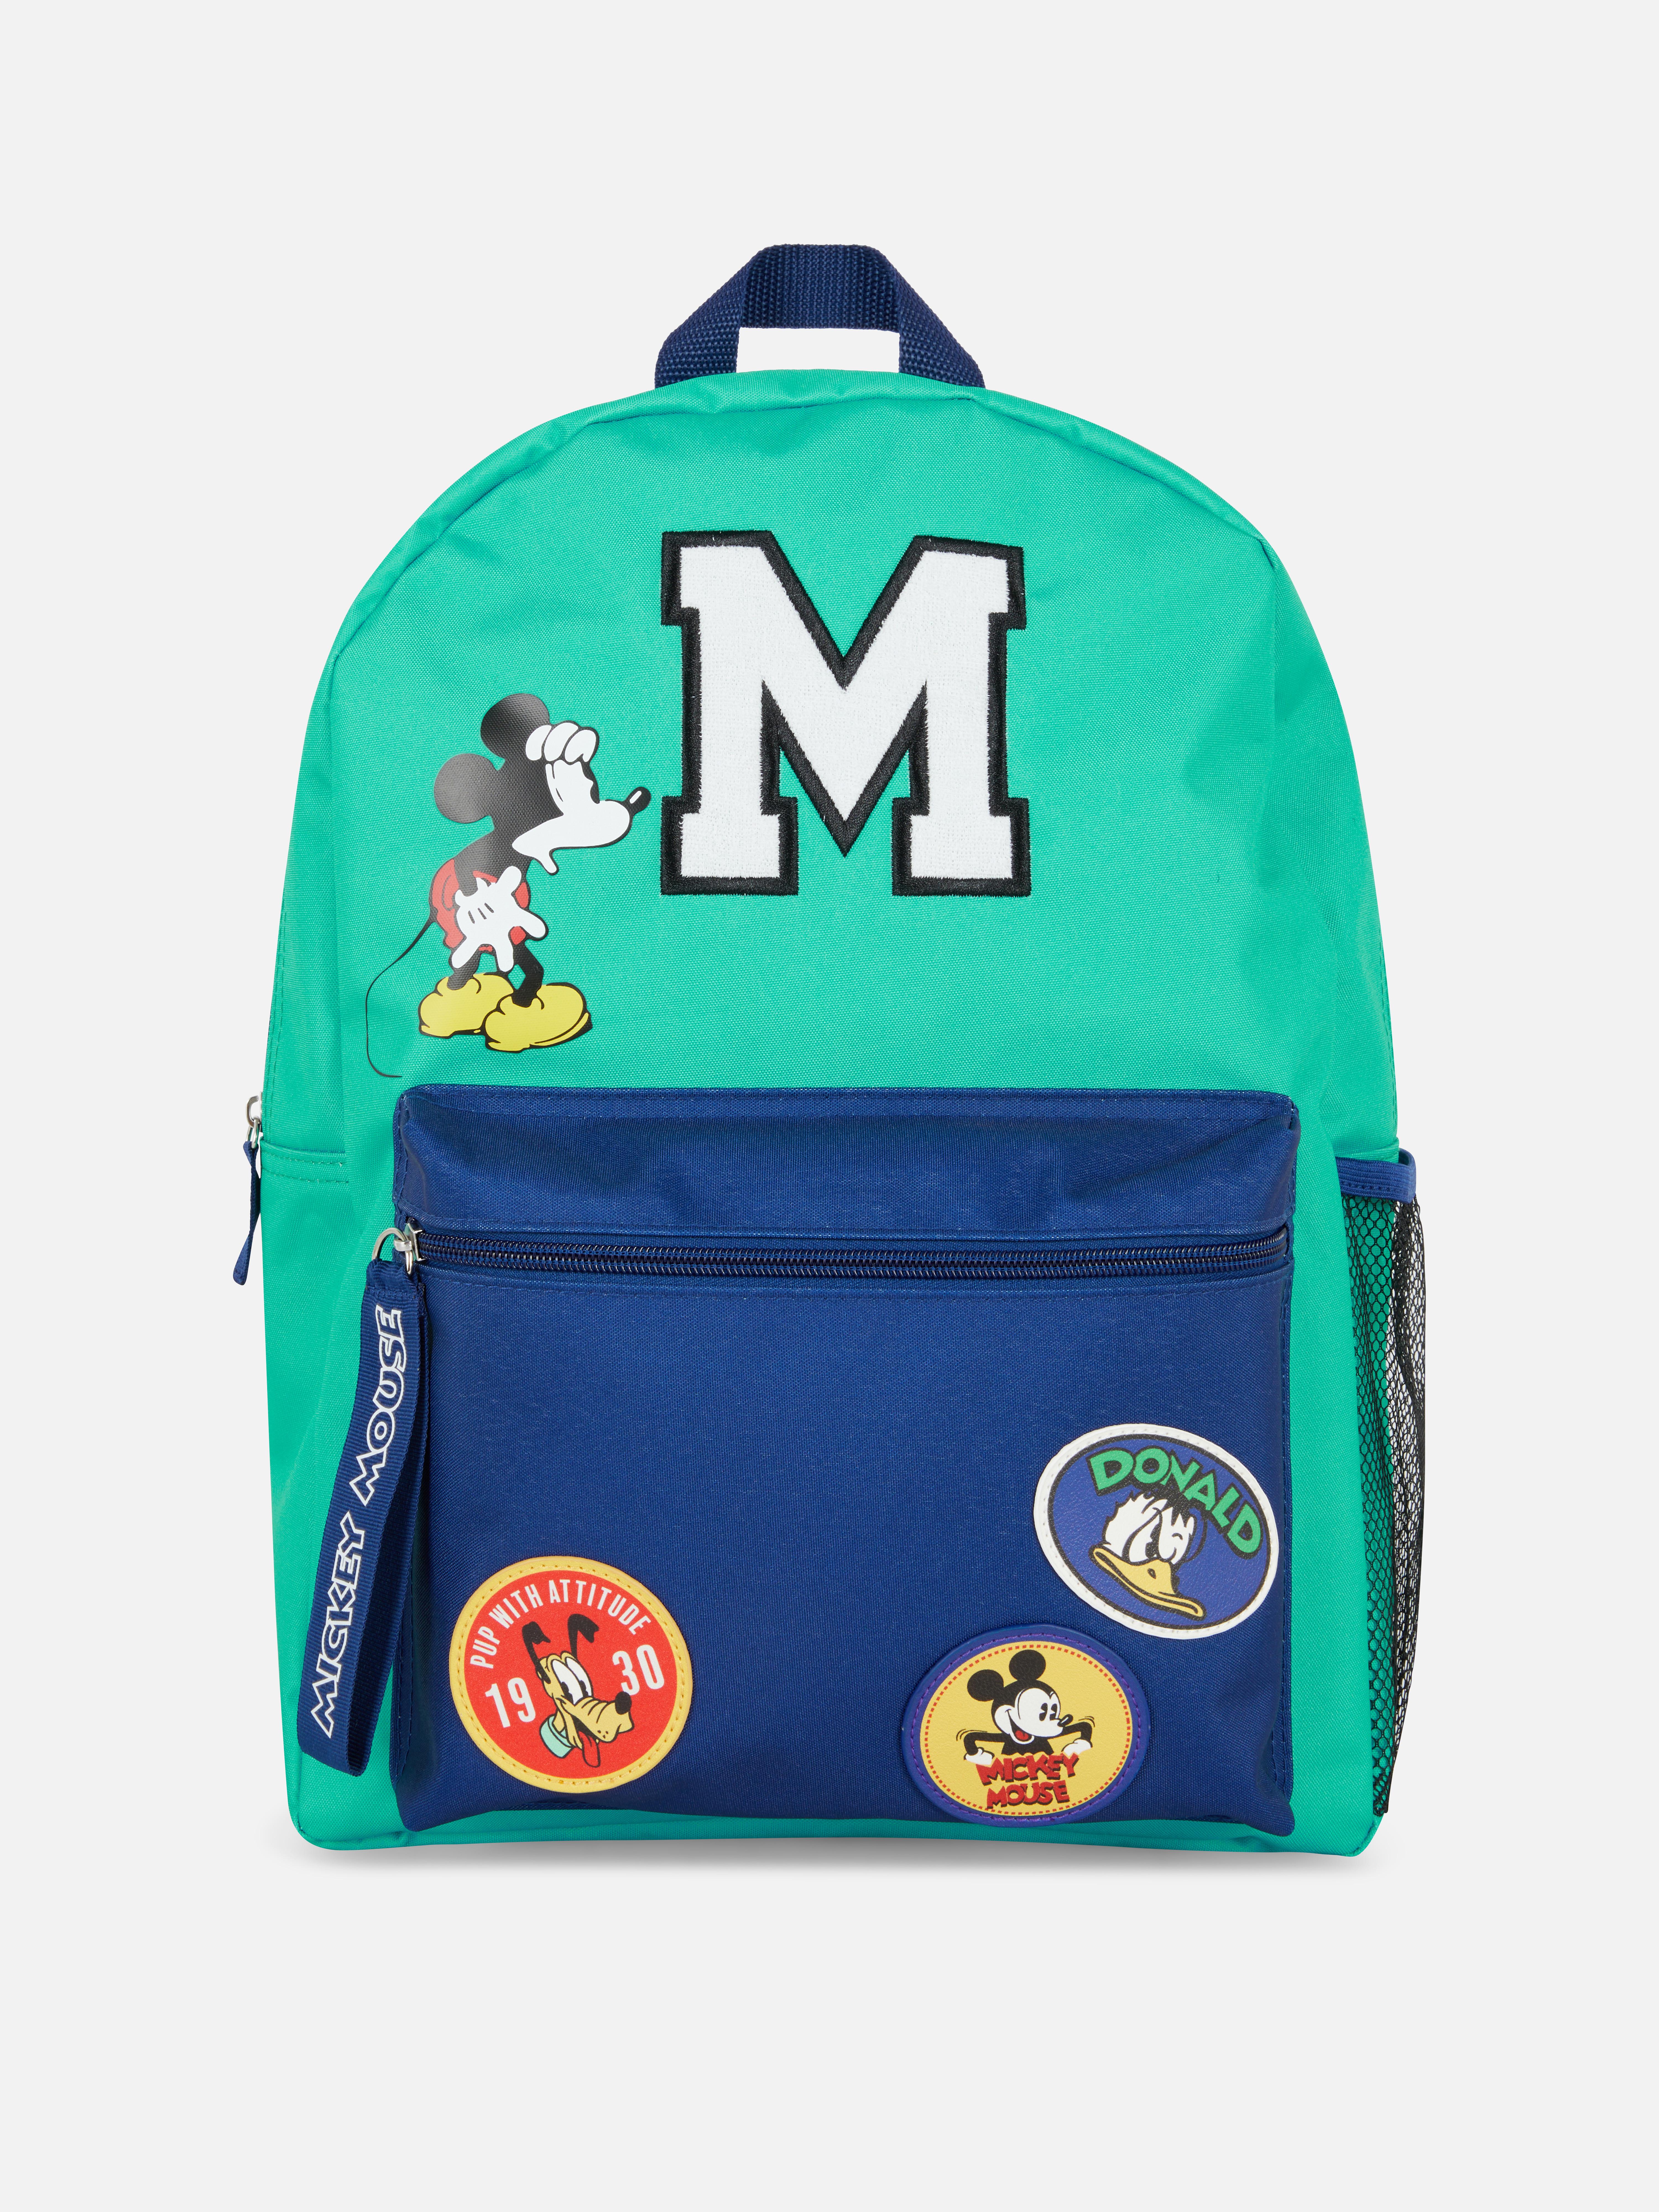 Disney's Mickey Mouse & Friends Originals Backpack